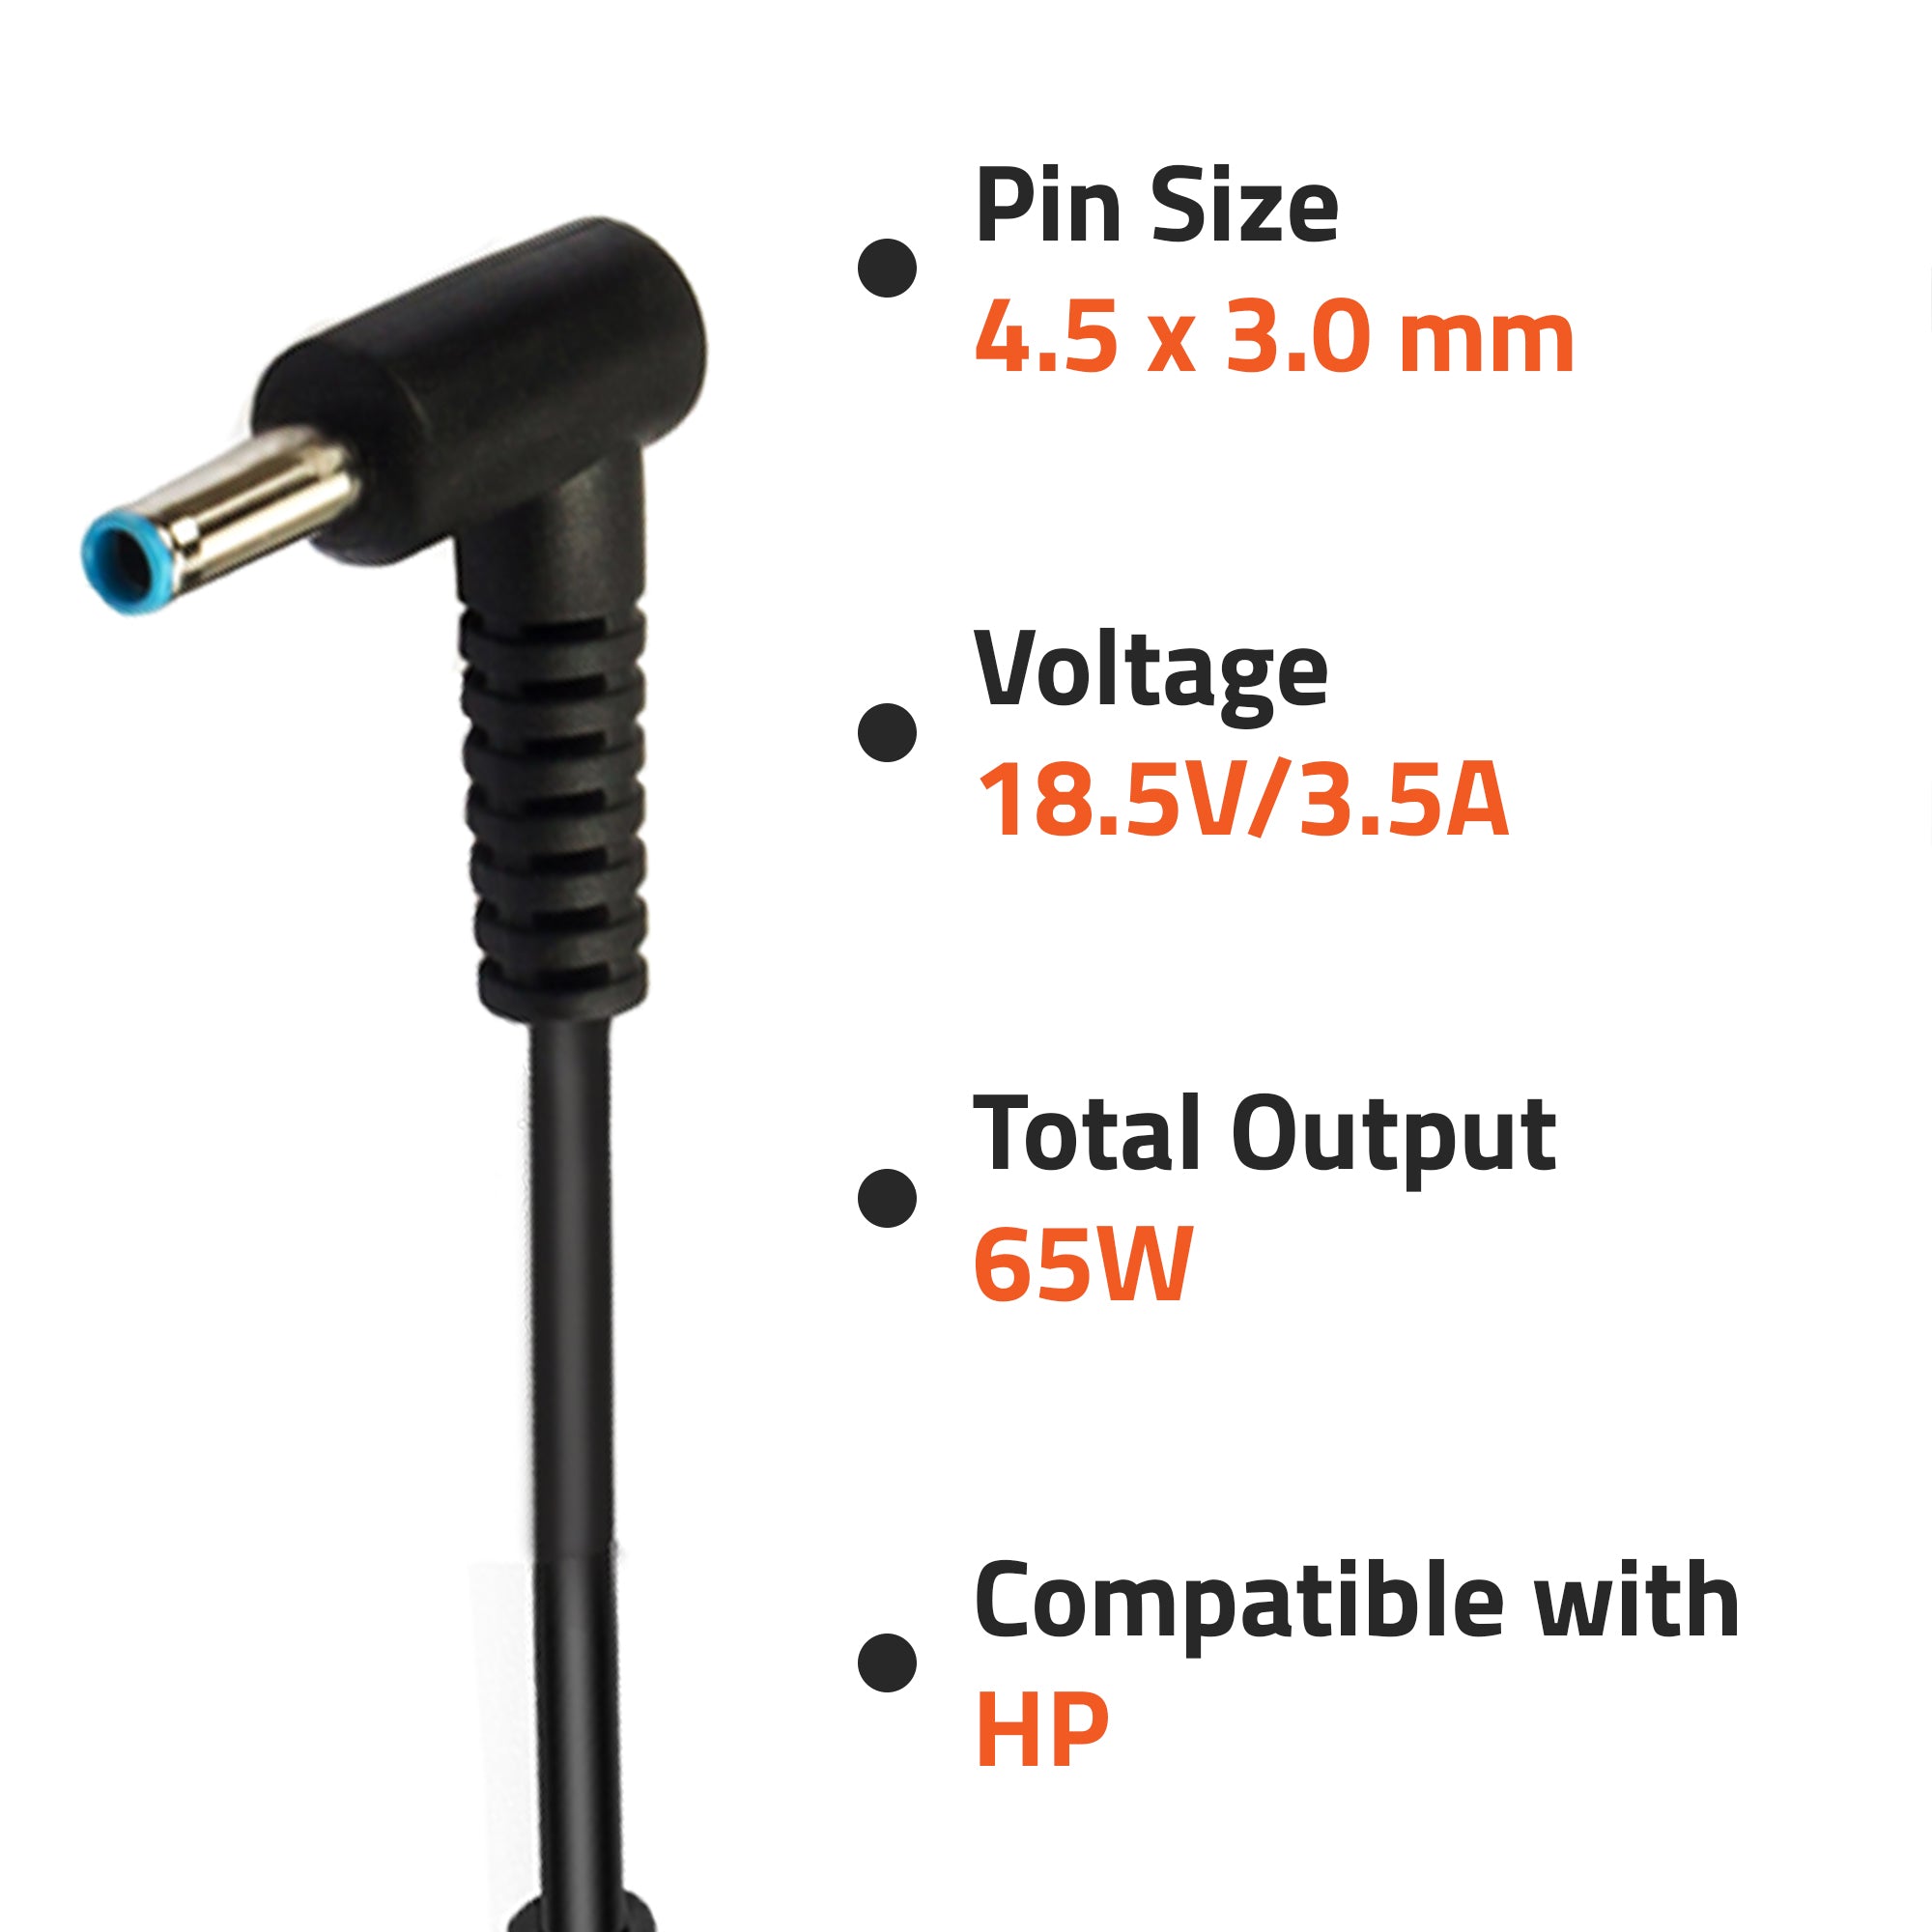 AR0502 65Watt Laptop Adapter Compatible with HP Laptops (18.5V/3.5A ,Blue Pin : 4.5 x 3.0mm)